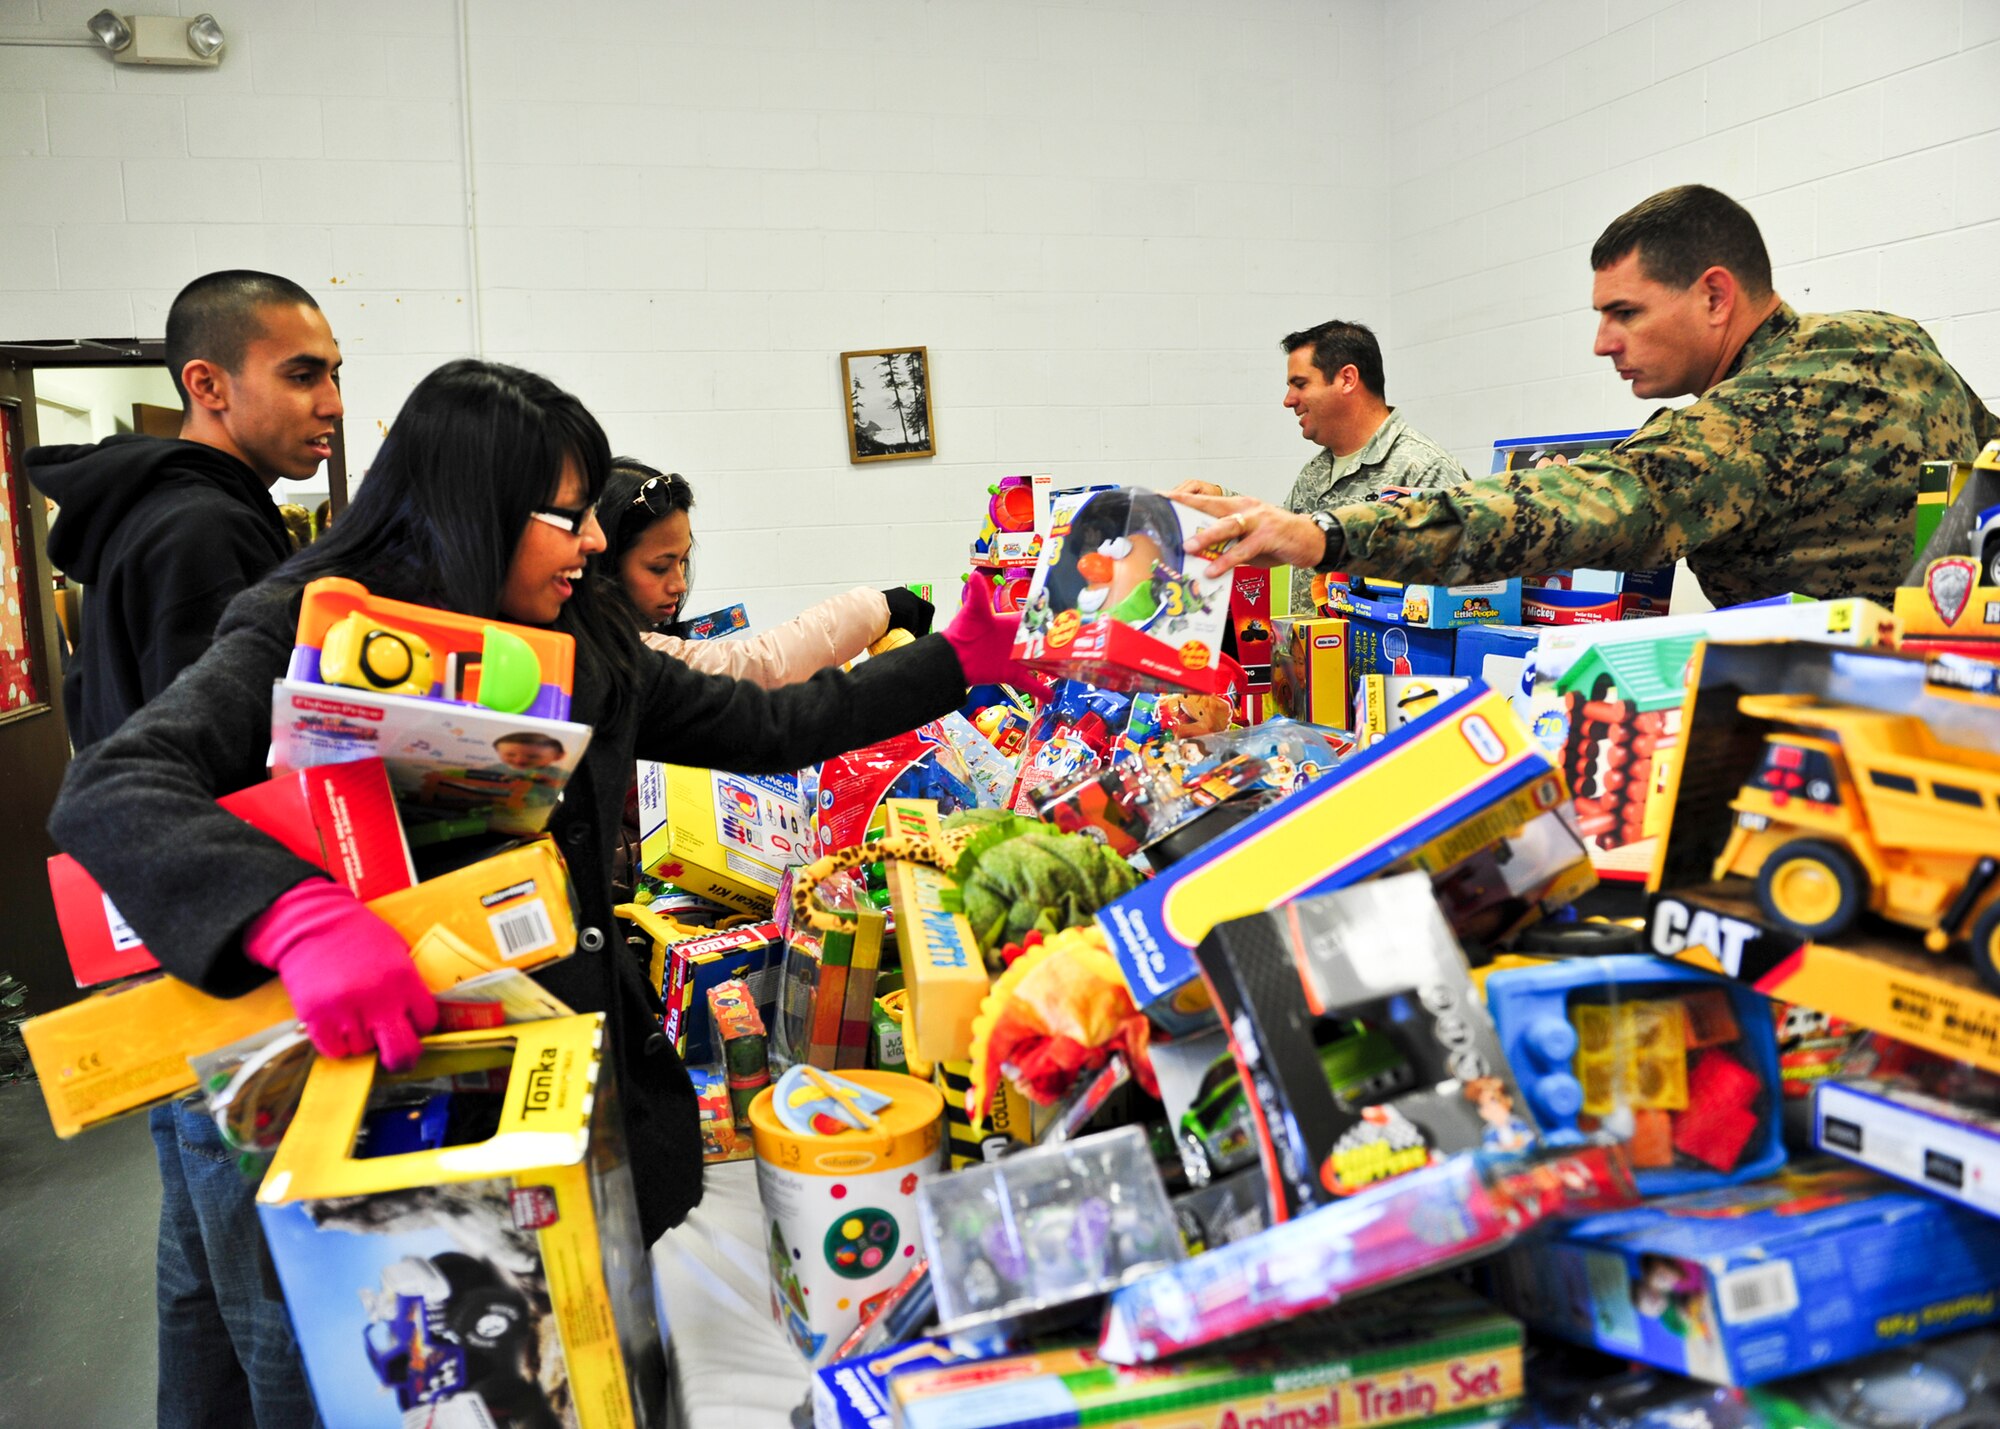 Service members were on hand to help families pick out gifts at the 8th annual toy distribution Nov. 30 at the Airman’s Attic. More than 4,000 toys were donated for the event, helping more than 200 families in the Eglin community.  (U.S. Air Force photo/Sachel Seabrook)